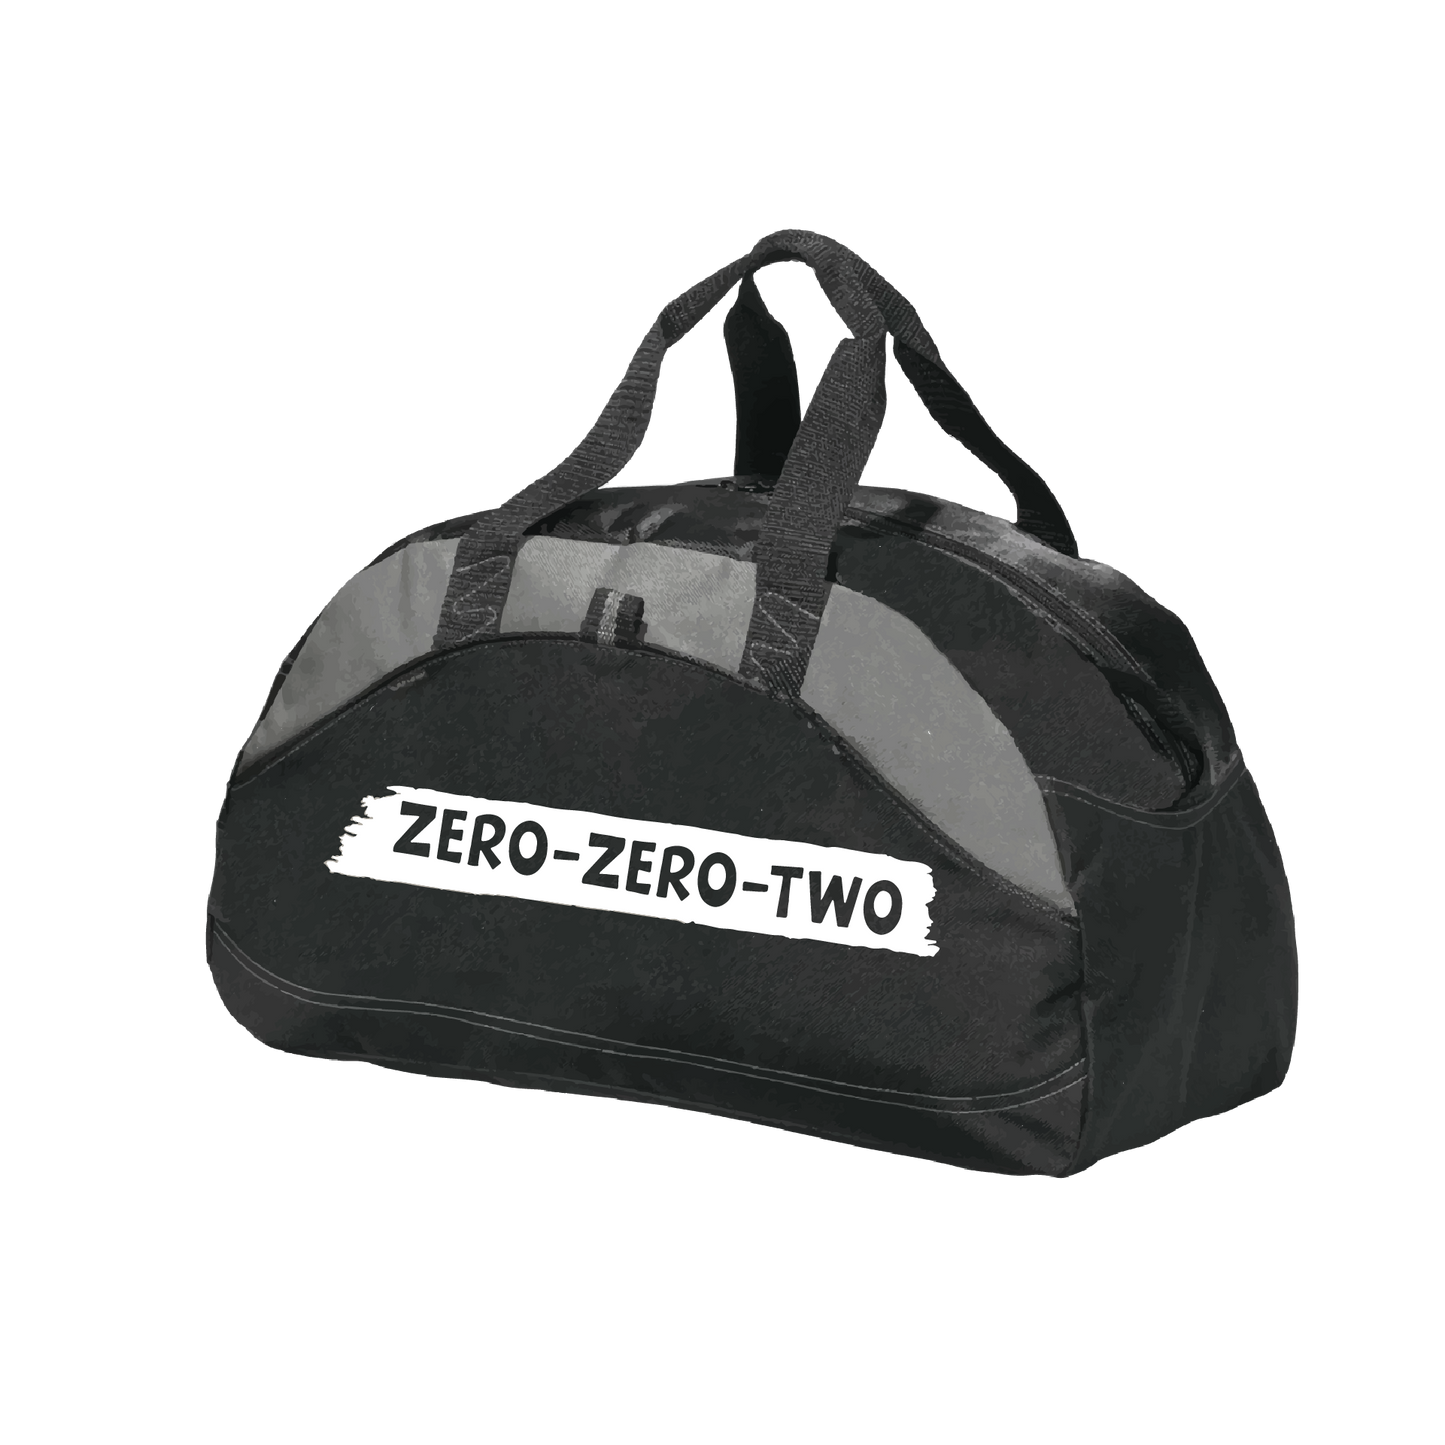 Pickleball Duffel Baag Design: Zero Zero Two  Carry your gear in comfort and style. This fun pickleball duffel bag is the perfect accessory for all pickleball players needing to keep their gear in one place. This medium sized duffel tote is ideal for all your pickleball activities. The large center compartment allows for plenty of space and the mesh end pocket is perfect for holding a water bottle